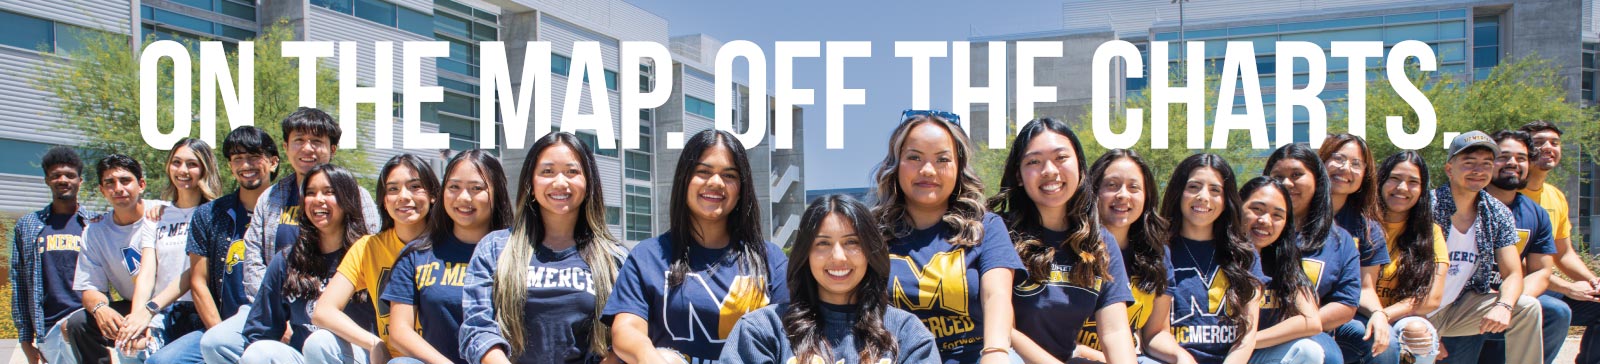 on the map and off the charts. uc merced ranks top 30 in the nation